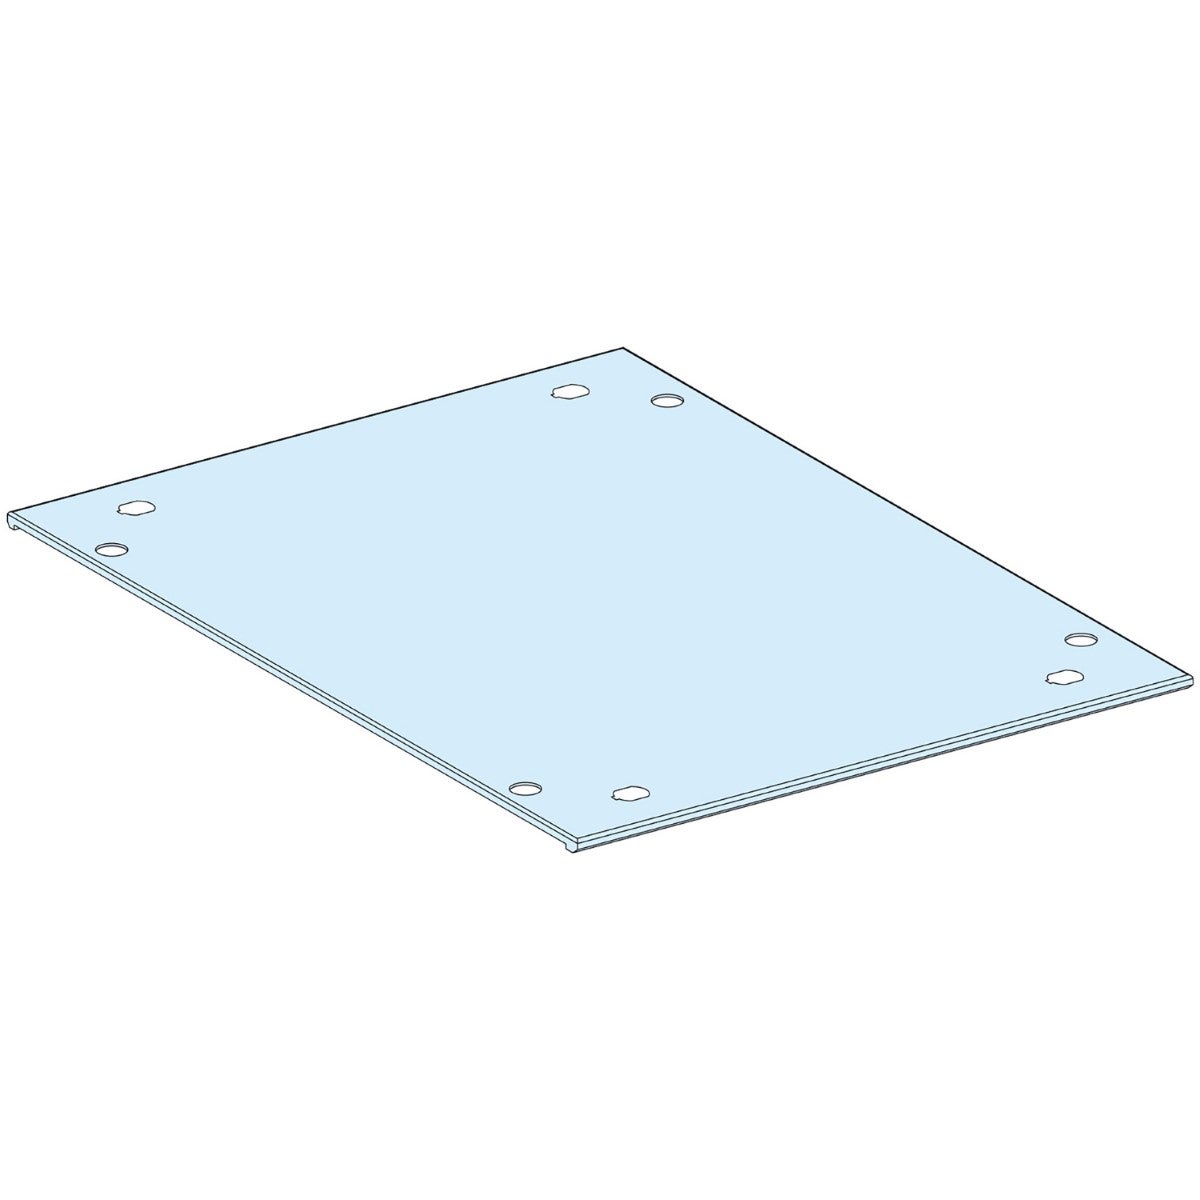 Roof plate, PrismaSeT P, for enclosure, W400mm, D400mm, IP30, white, RAL 9003